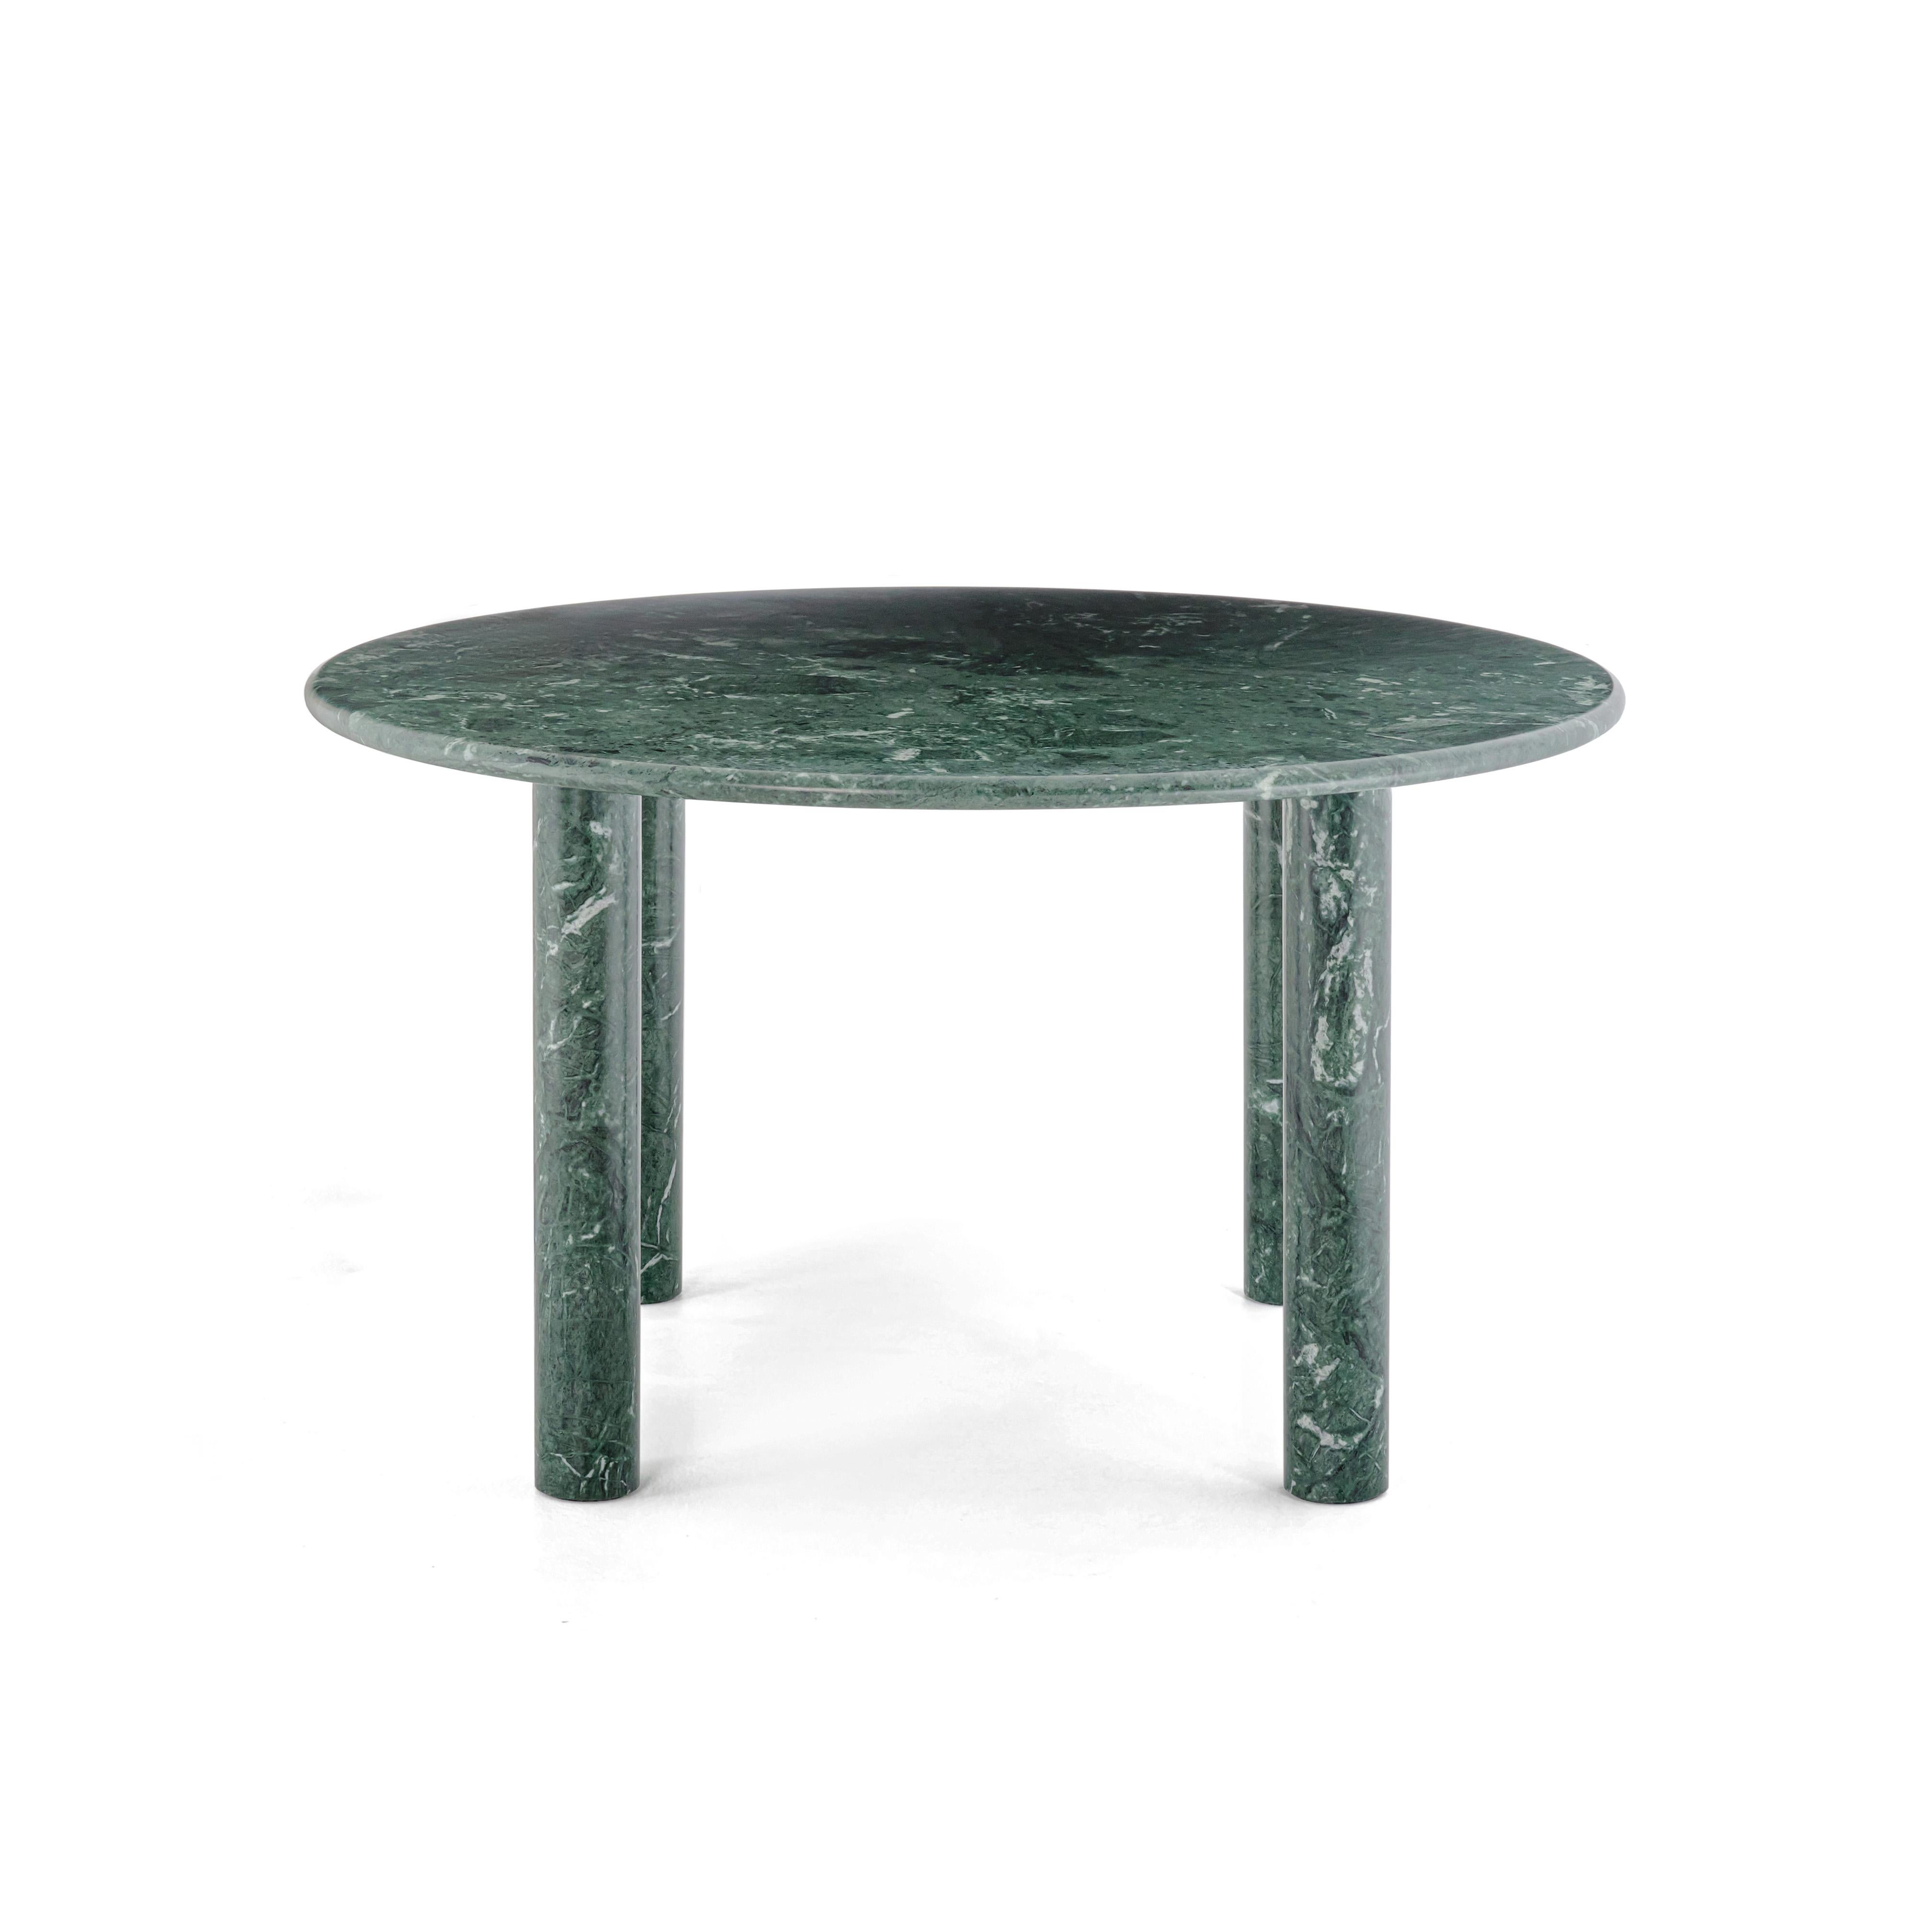 Dining table Paul cut off large slabs of green marble designed as a Limited Edition piece. Each piece’s pattern and texture are unique, making it a sought-after collector’s item.

The table's design is a 